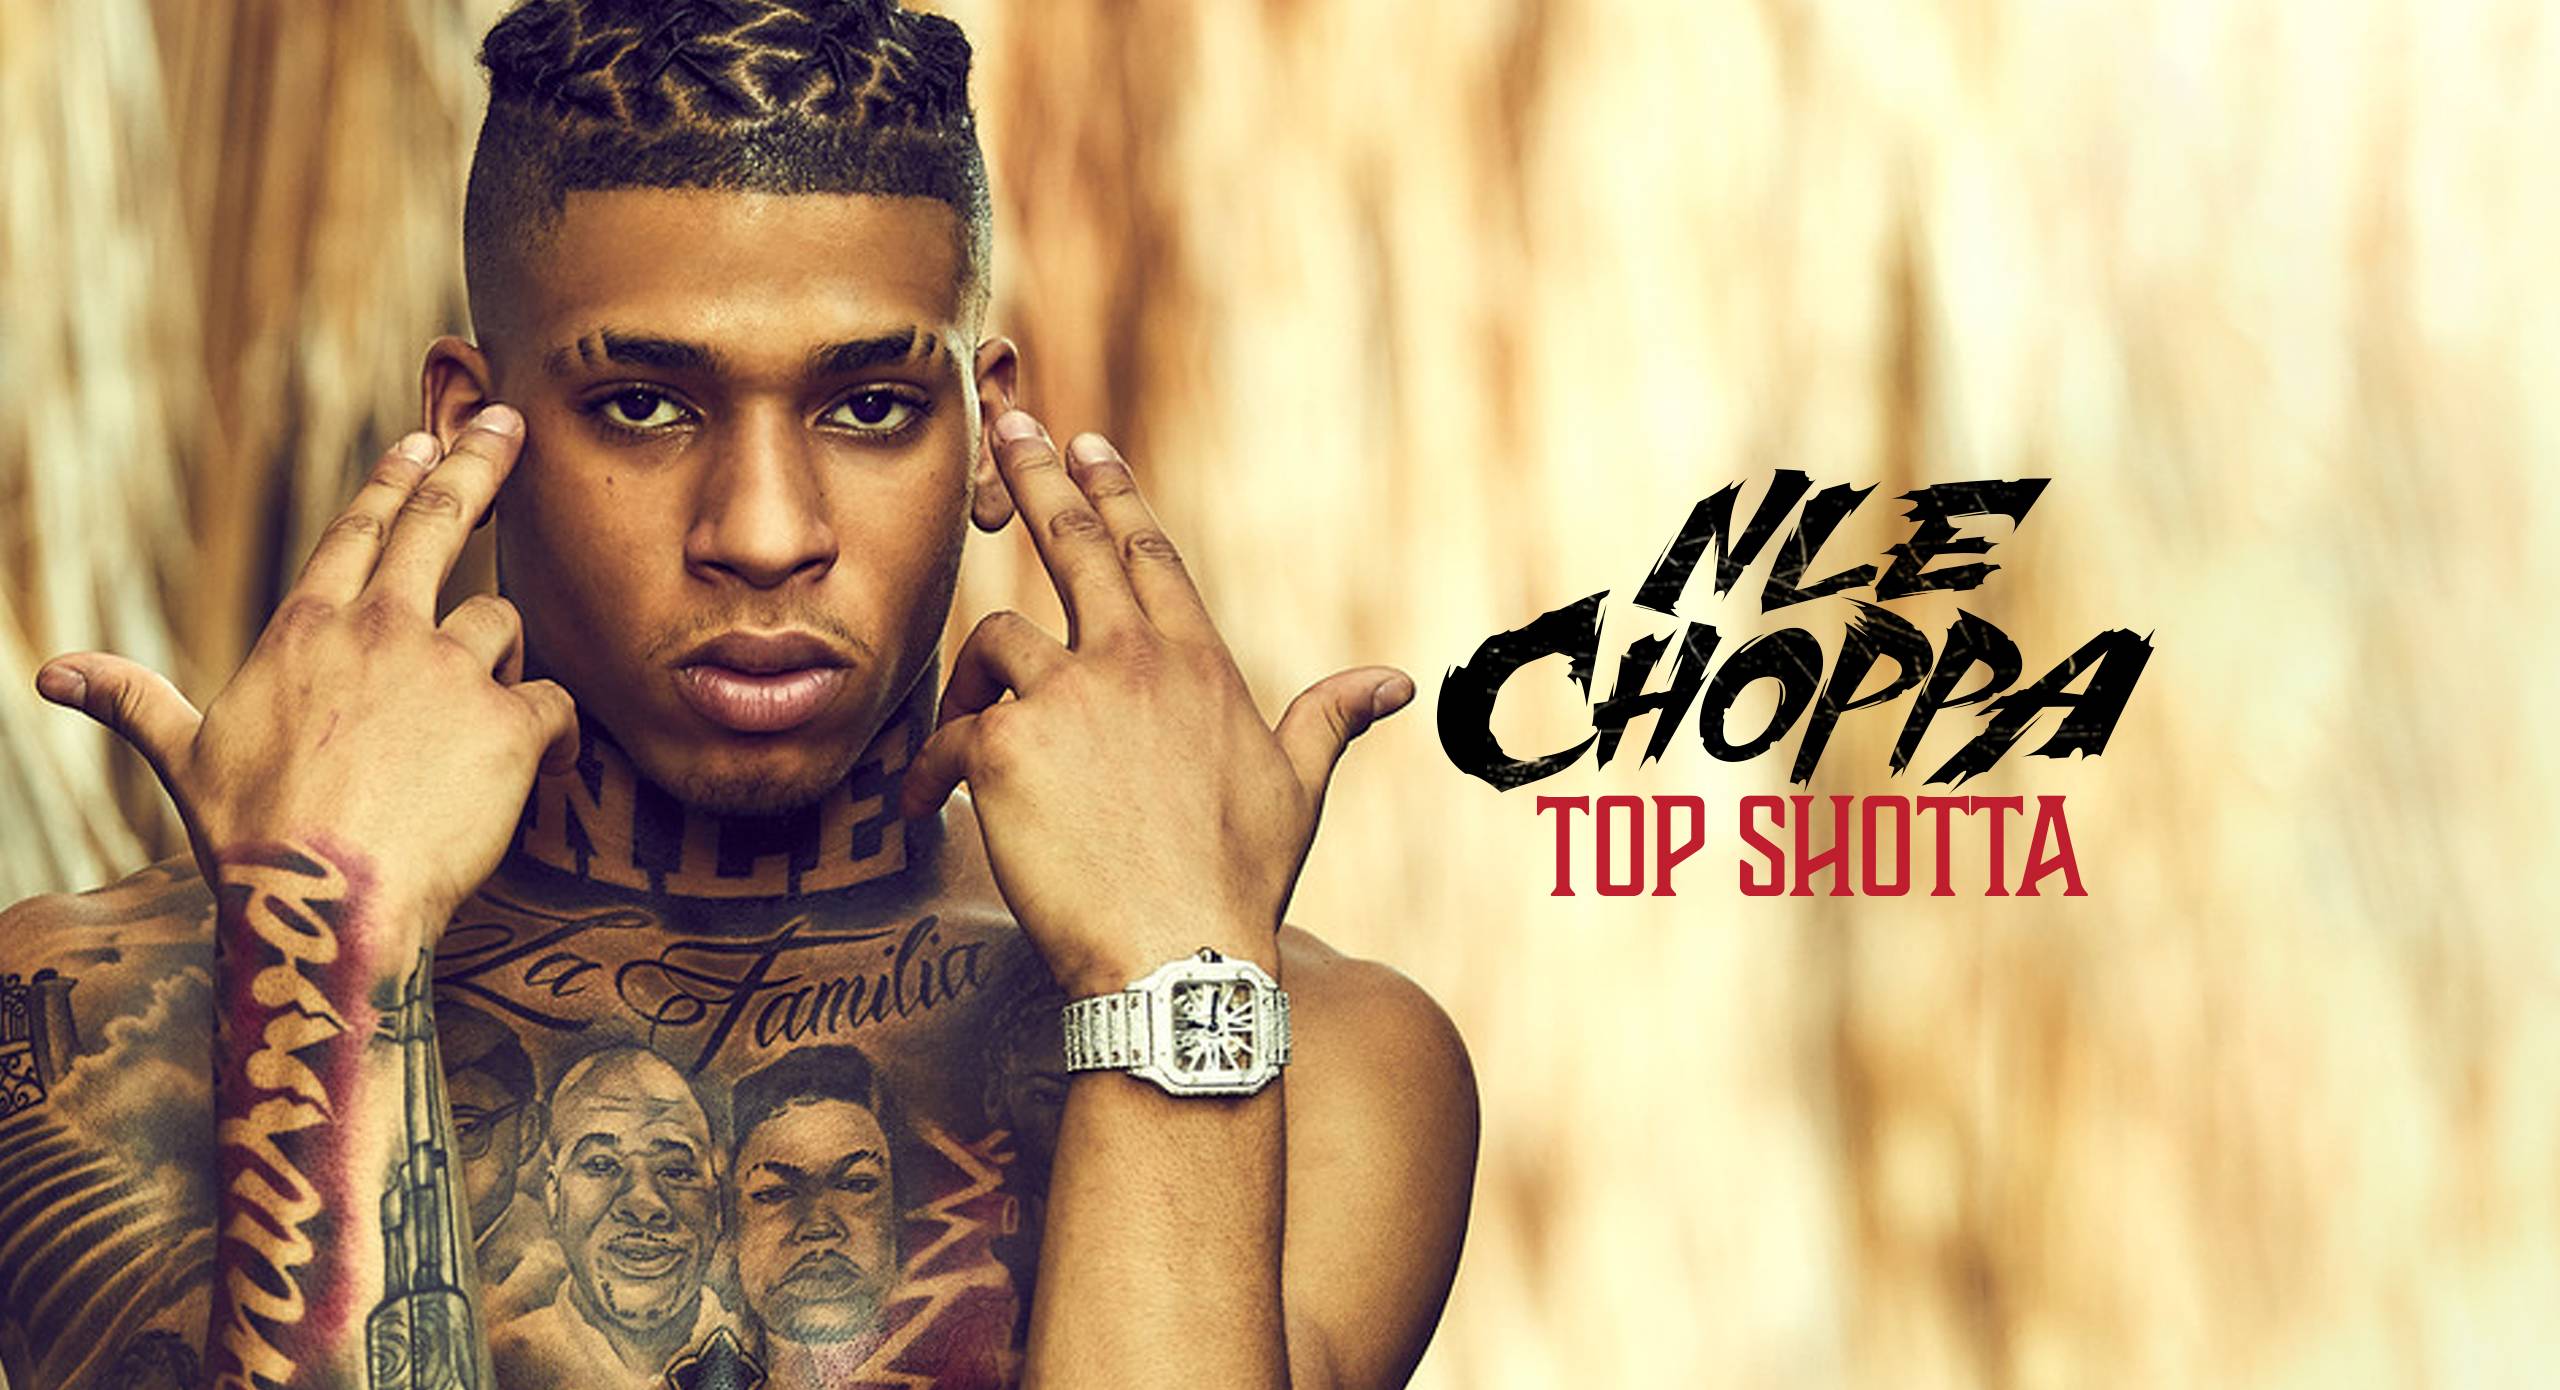 Nle Choppa Wallpaper : NLE Choppa Wallpaper - KoLPaPer - Awesome Free HD Wallpapers / This application provides more than 40 wallpapers that you can use as wallpaper for your android with hd quality.